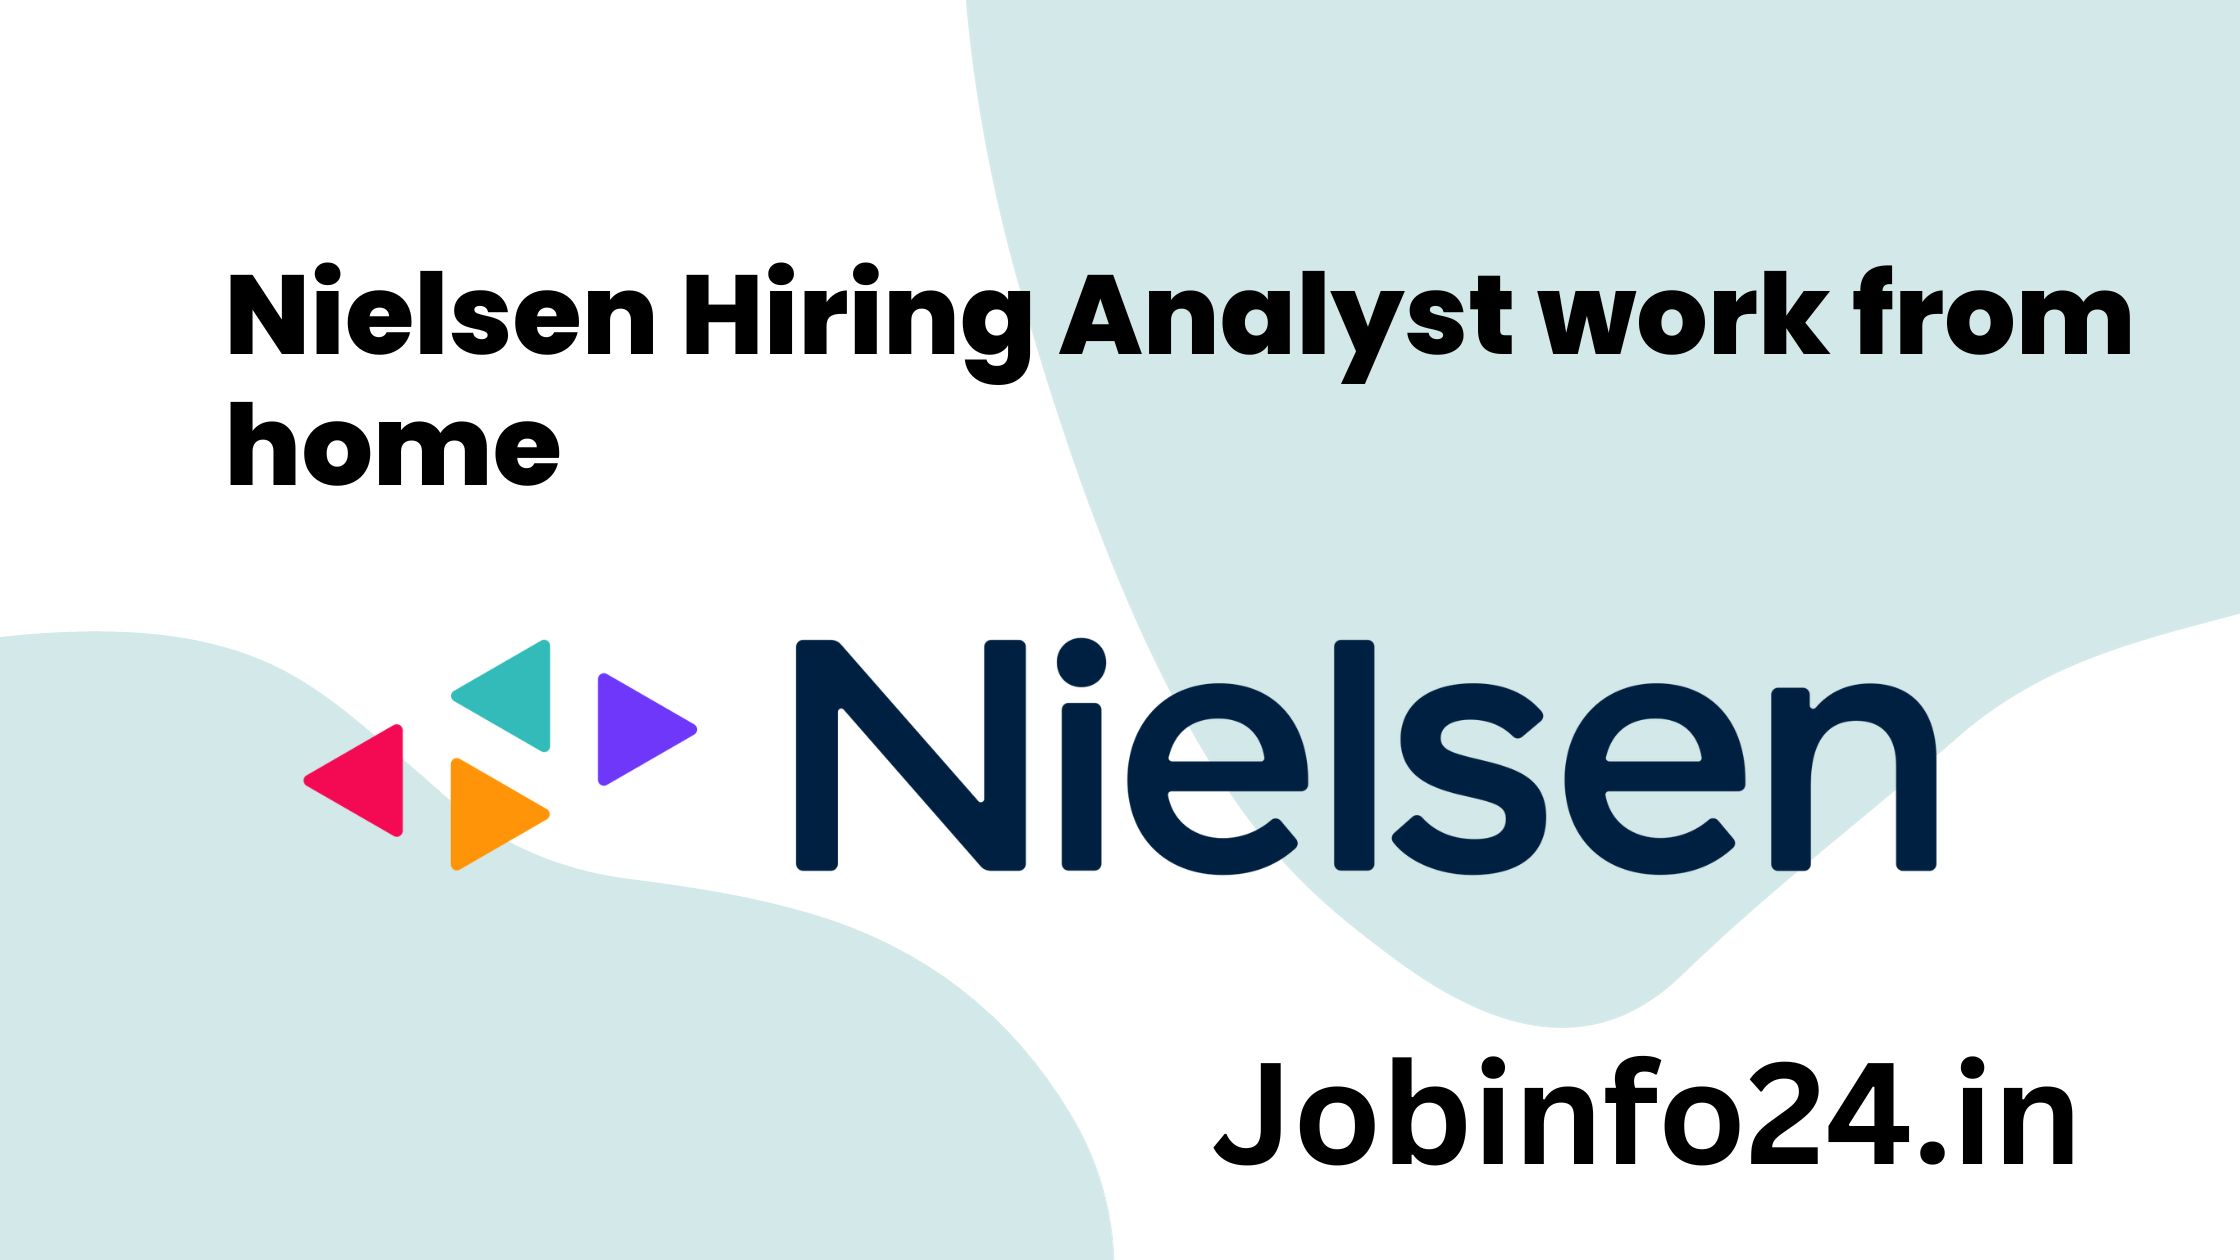 Nielsen Hiring Analyst work from home